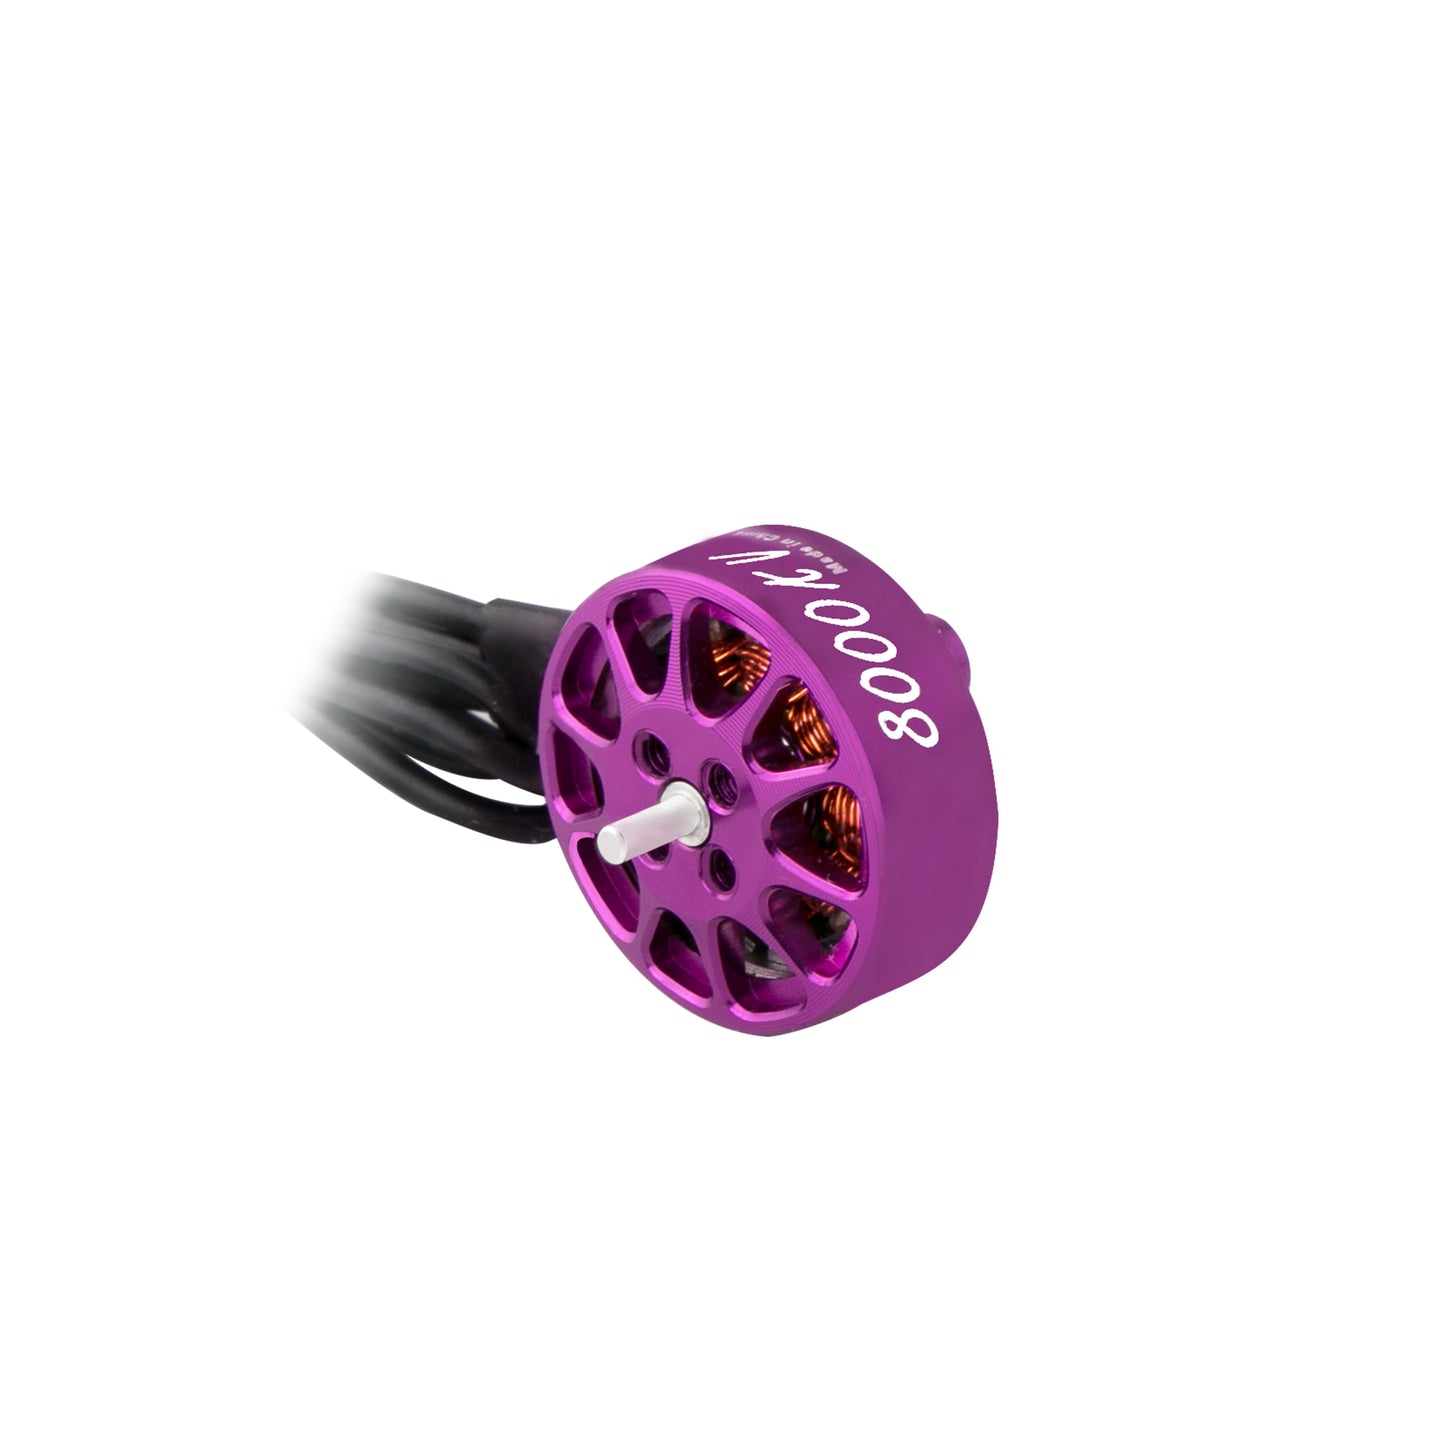 4PCS FlashHobby K1303 1303 5000KV 8000KV 2-4S Brushless Motor for FPV Freestyle Tinywhoop Cinewhoop Toothpick Drone RC Model